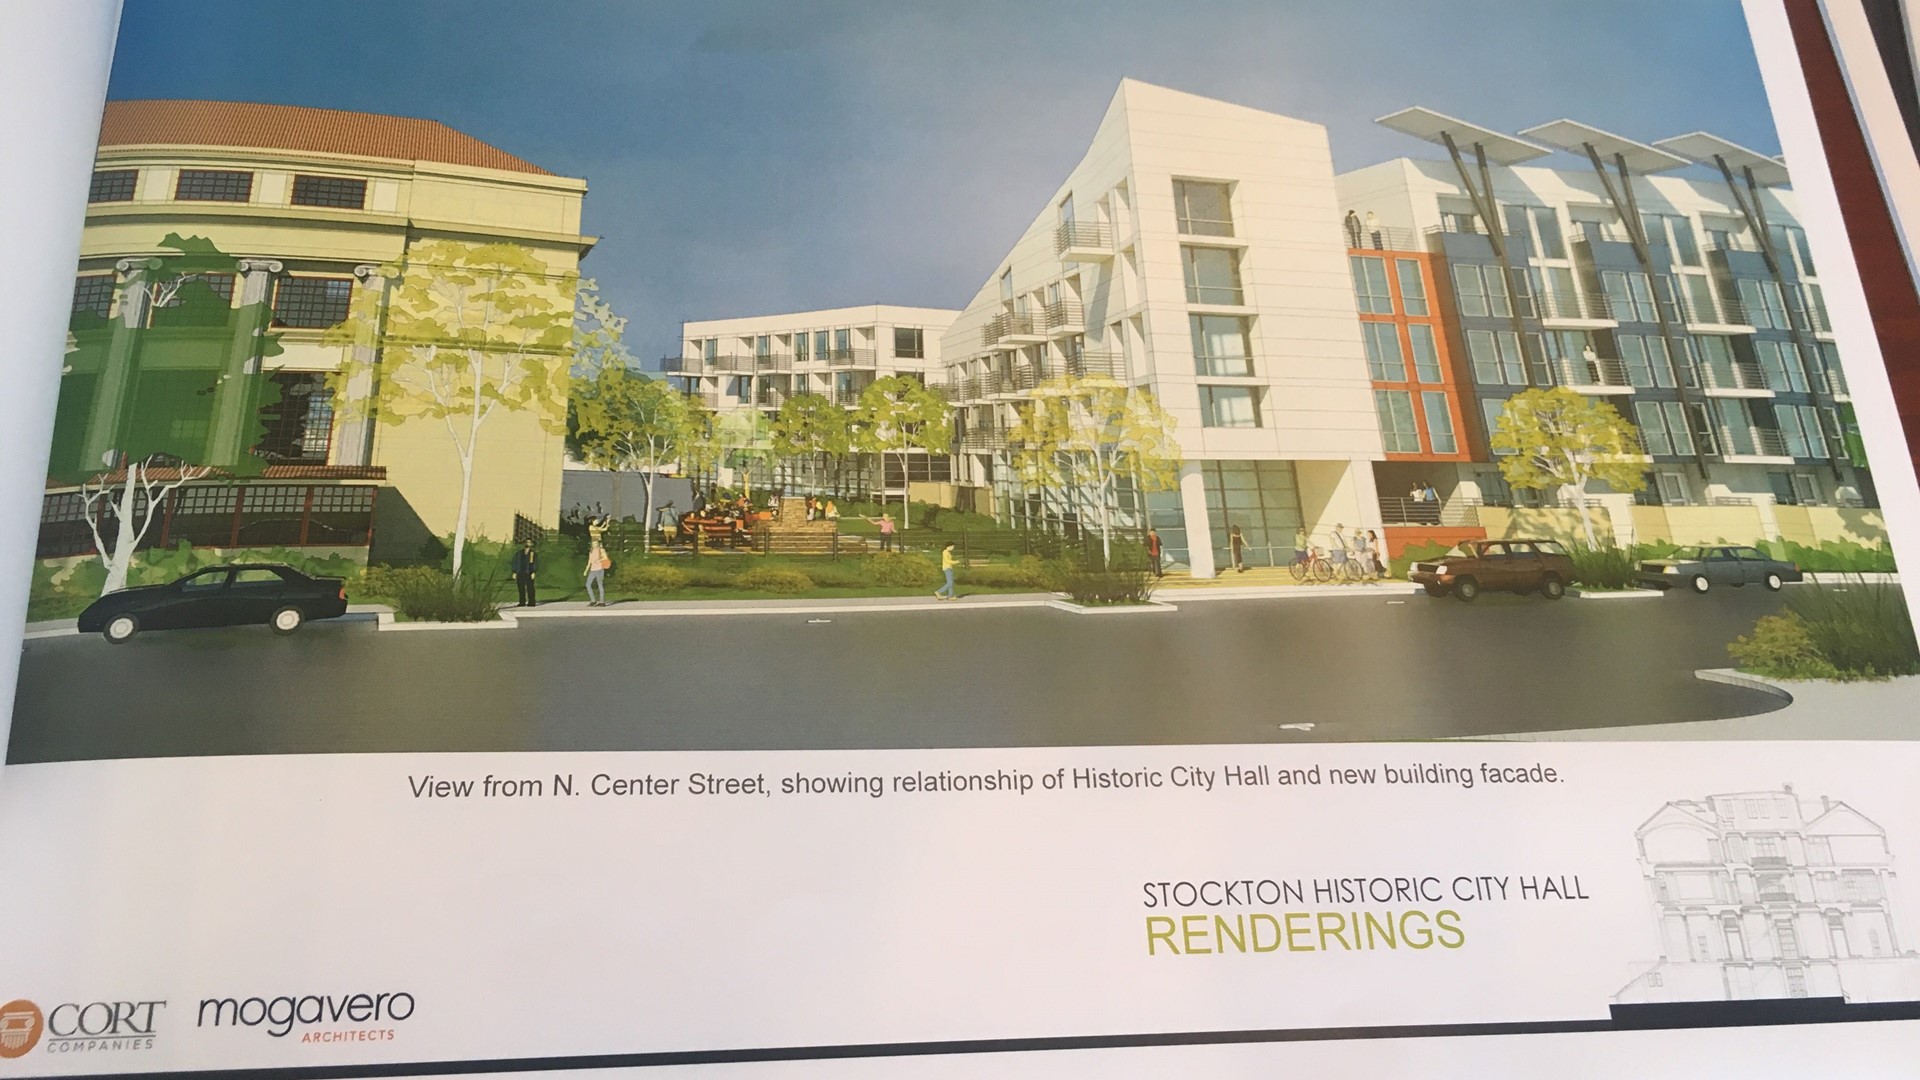 A Stockton developer is seeking agreement with the city to renovate City Hall and level three adjacent buildings to add about 120 apartments in downtown.